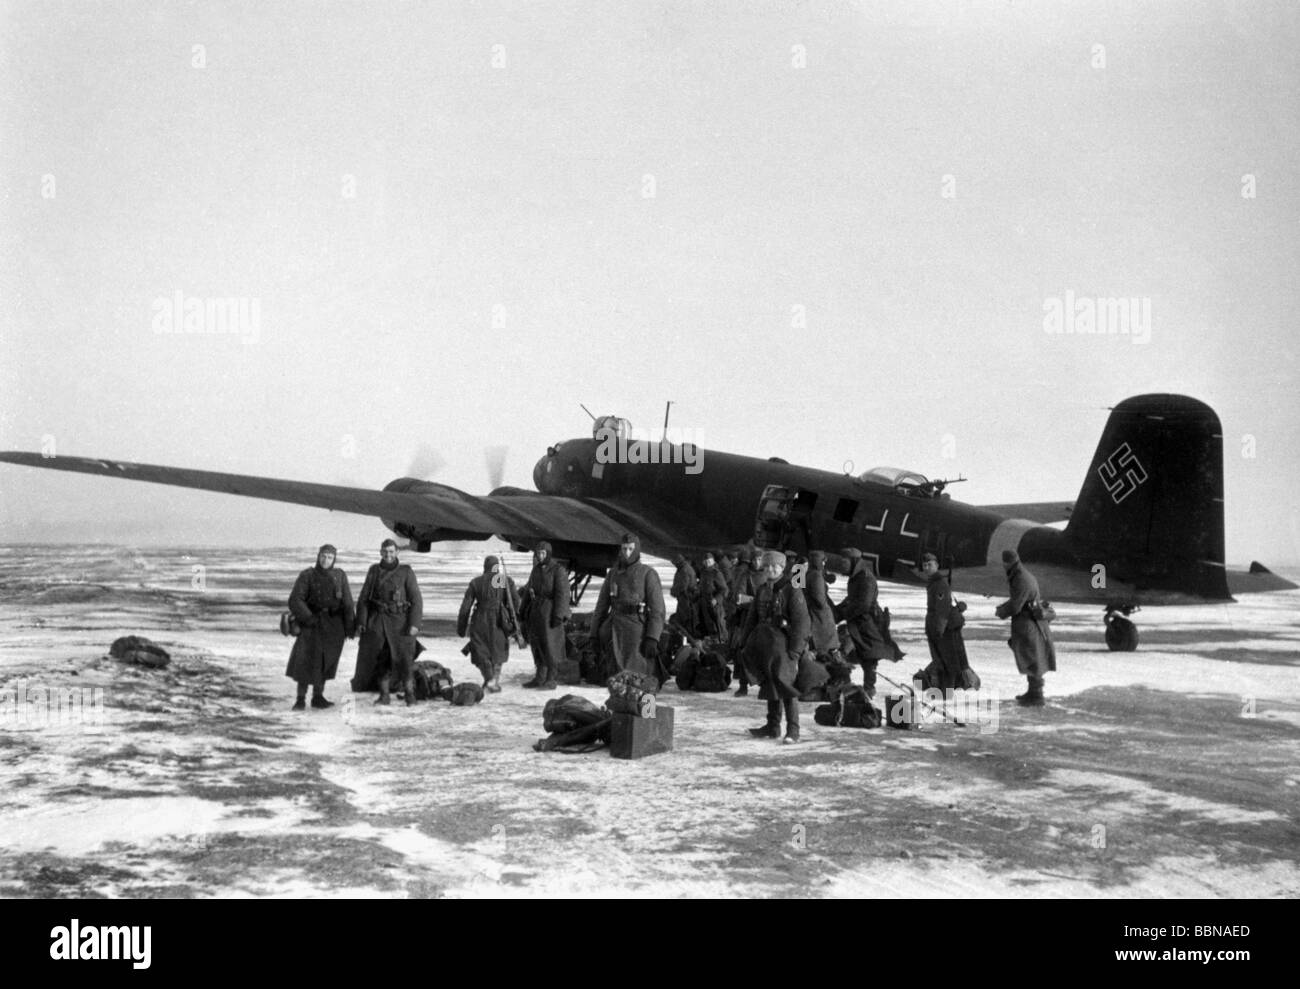 events, Second World War / WWII, aerial warfare, aircraft, German soldiers in front of a transport and reconnaissance aircraft Focke-Wulf Fw 200 'Condor', Kerch, Crimea, Ukraine, 6.2.1943, Stock Photo